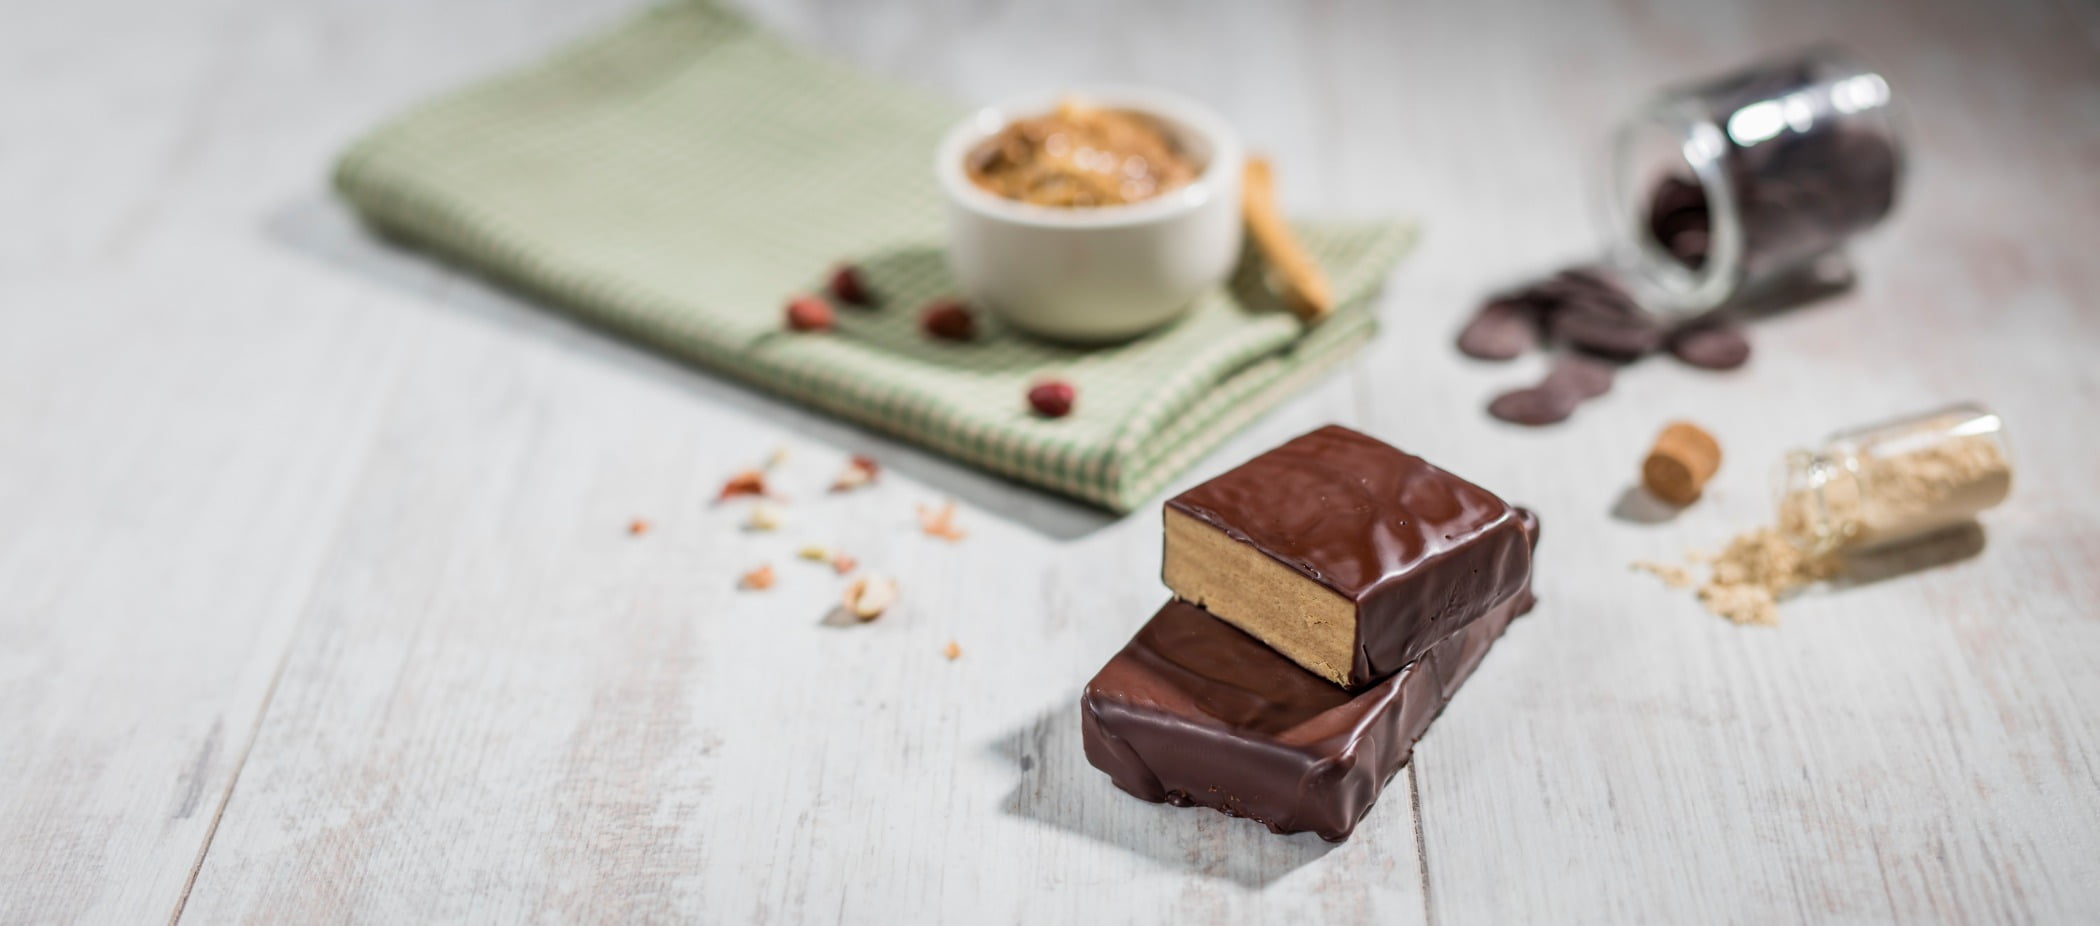 Kerry-Chocolate-And-Peanut-Butter-Protein-Bar